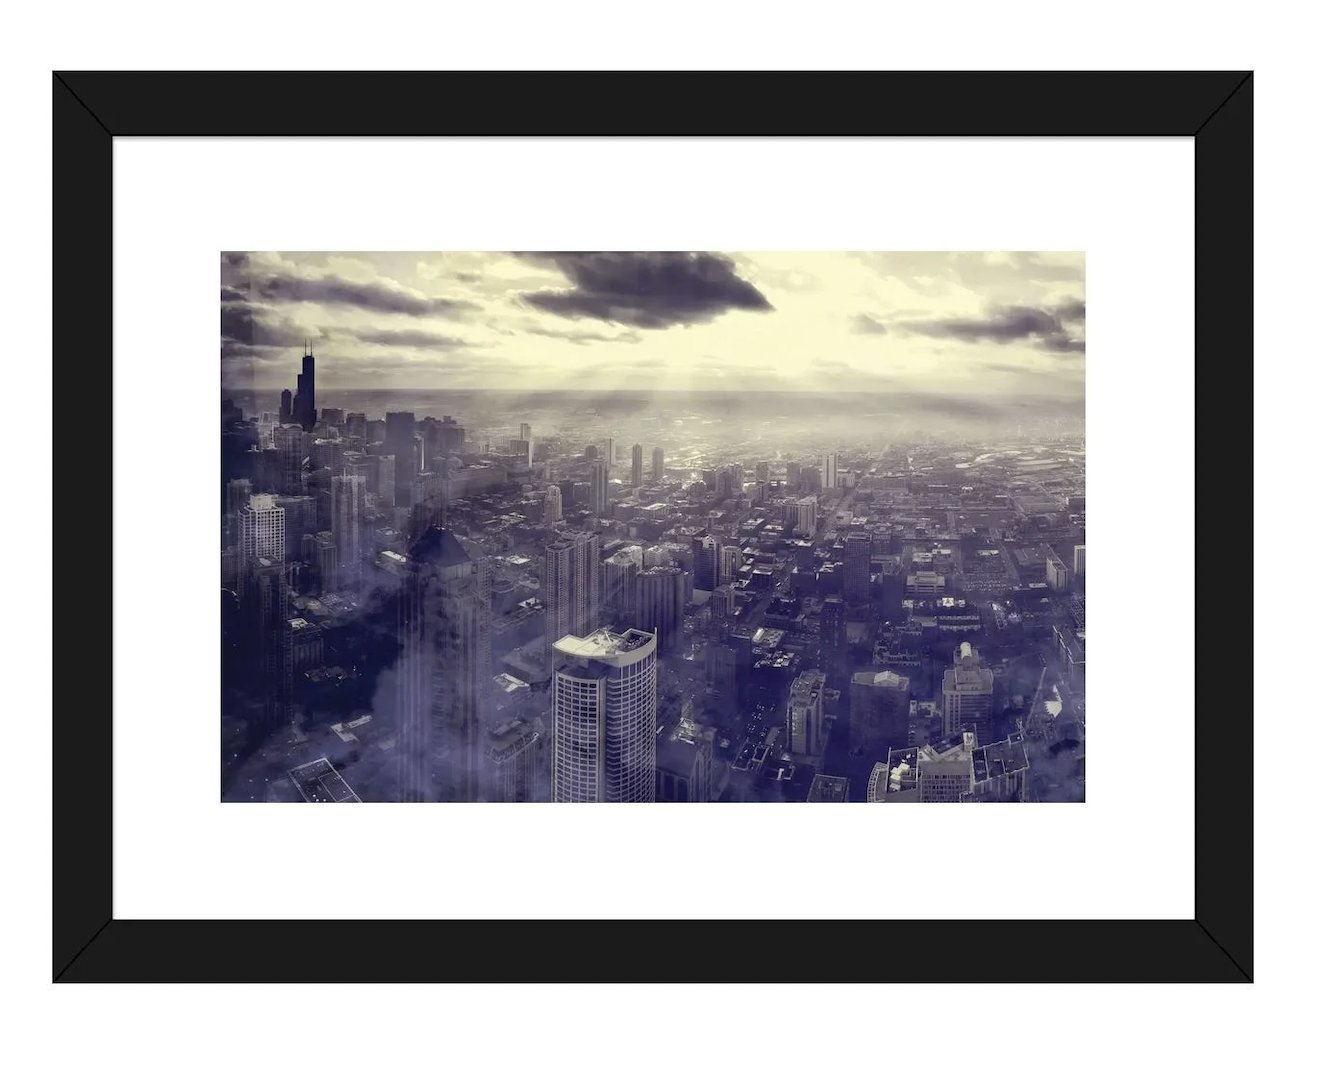 Chicago by Taylor Allen - Photograph Print - Image 0